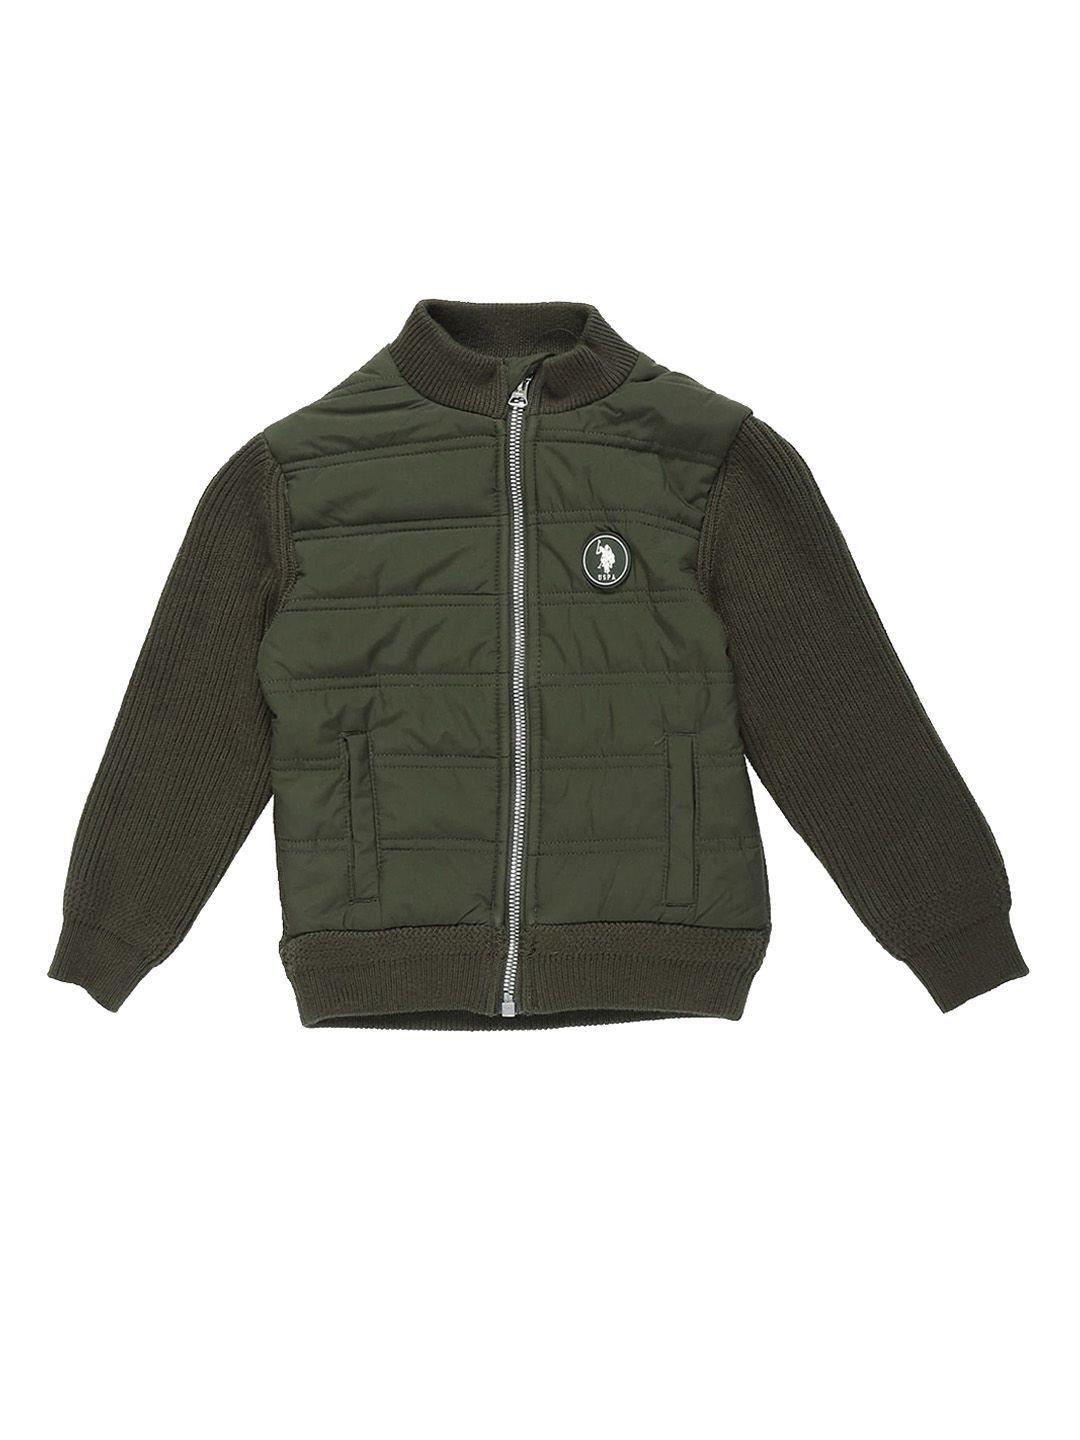 u.s. polo assn. kids boys stand collar cotton quilted jacket